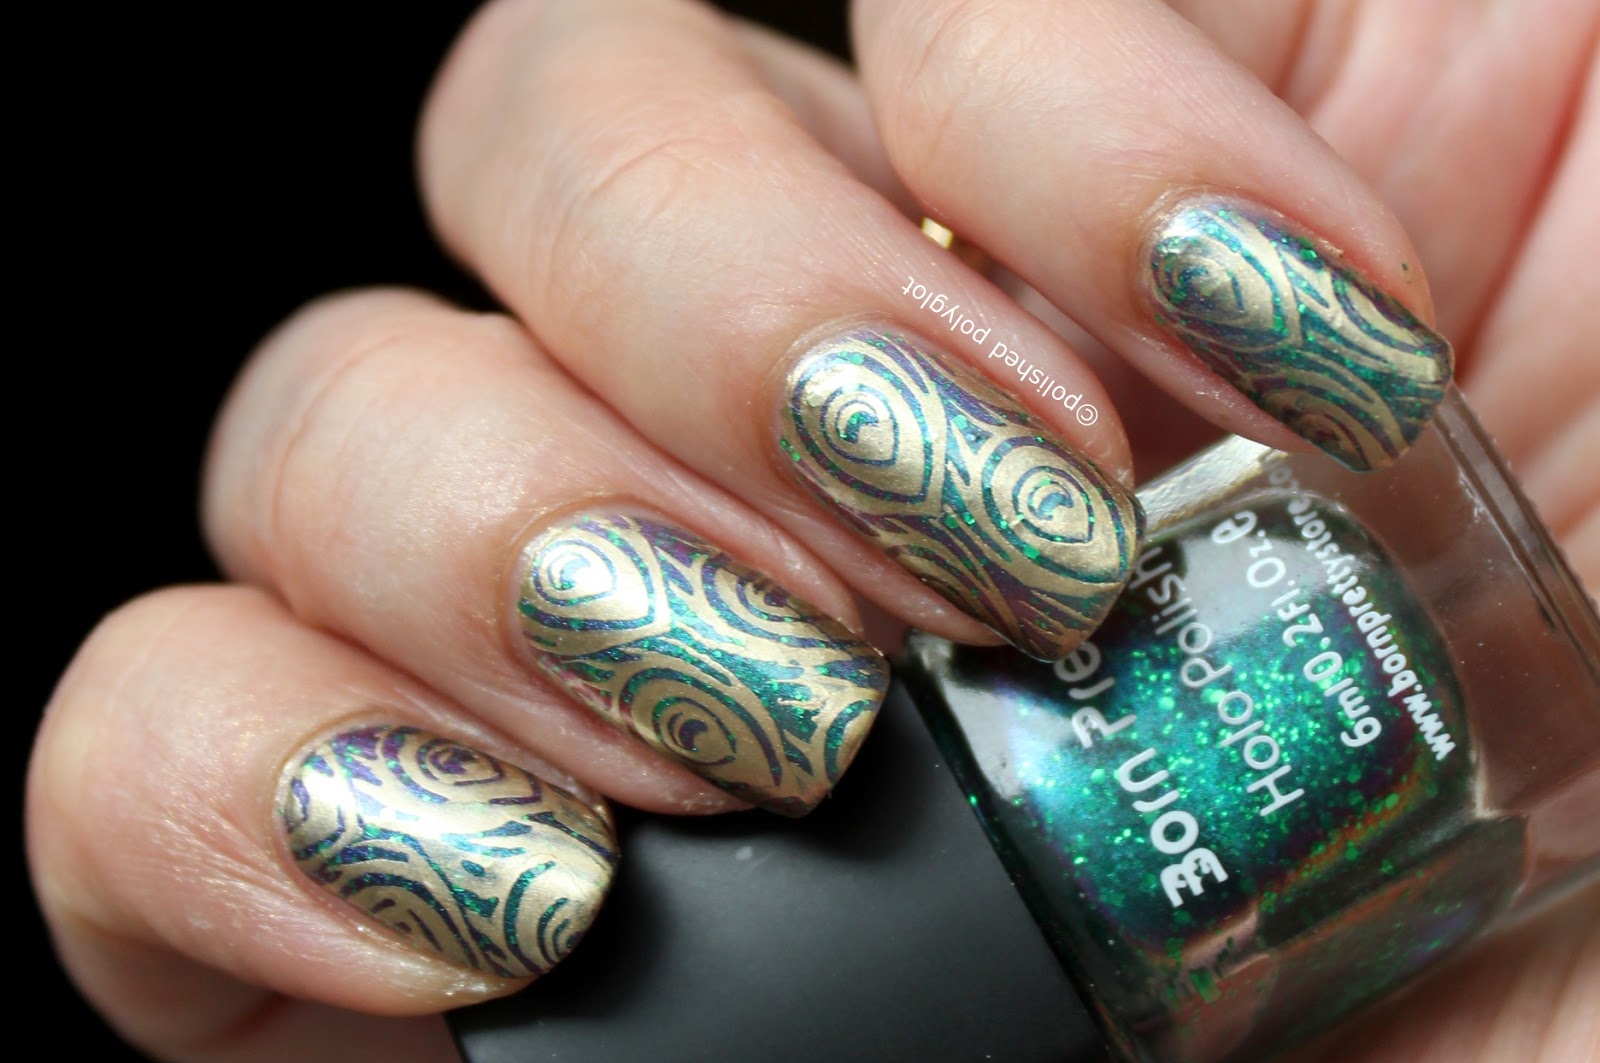 5. "Colorful Peacock Nail Art Ideas" - wide 8